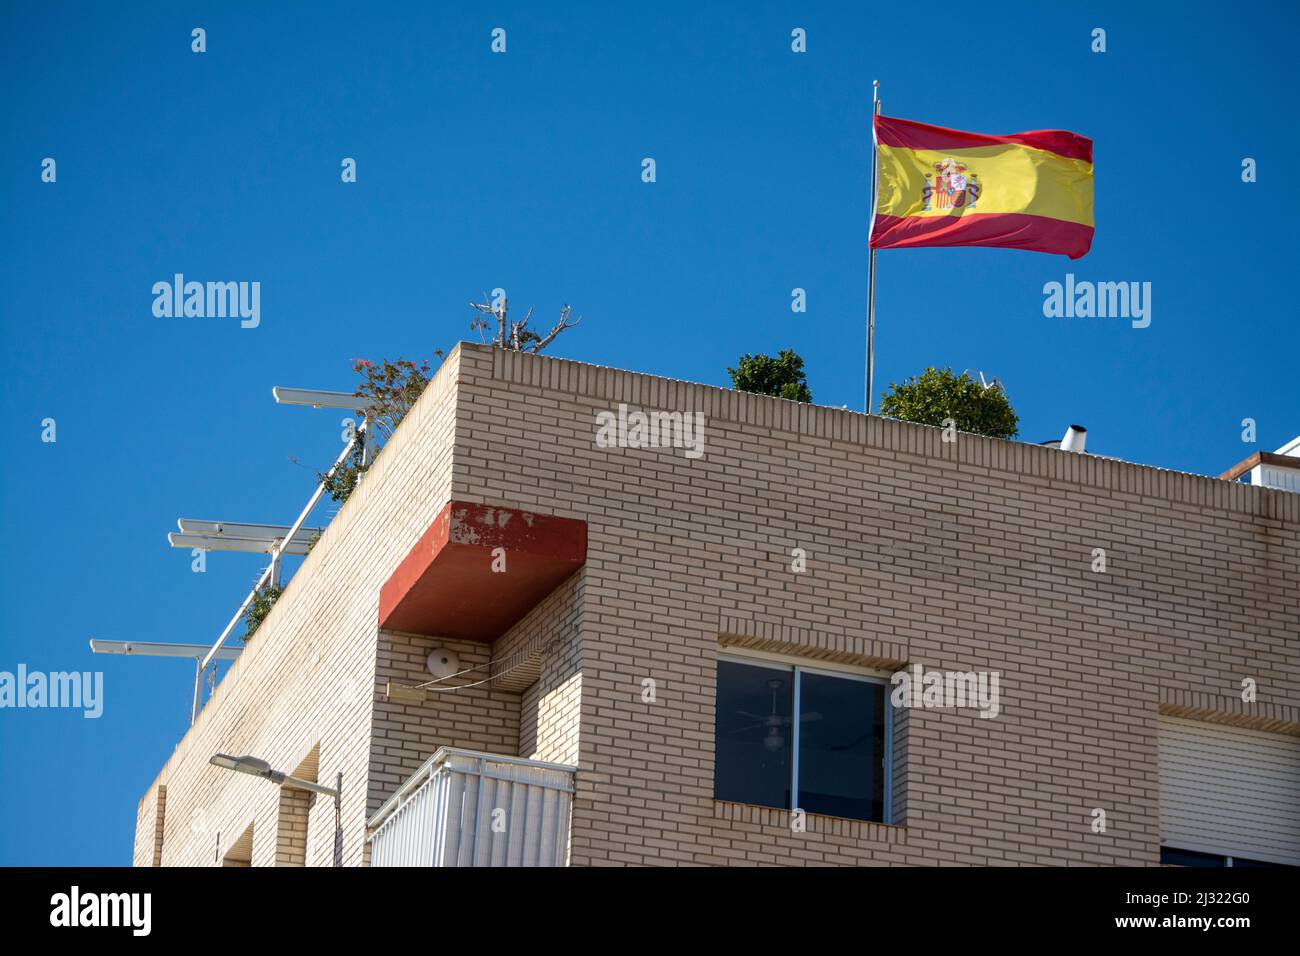 Apartment block with Spanish flag flying on the roof Stock Photo